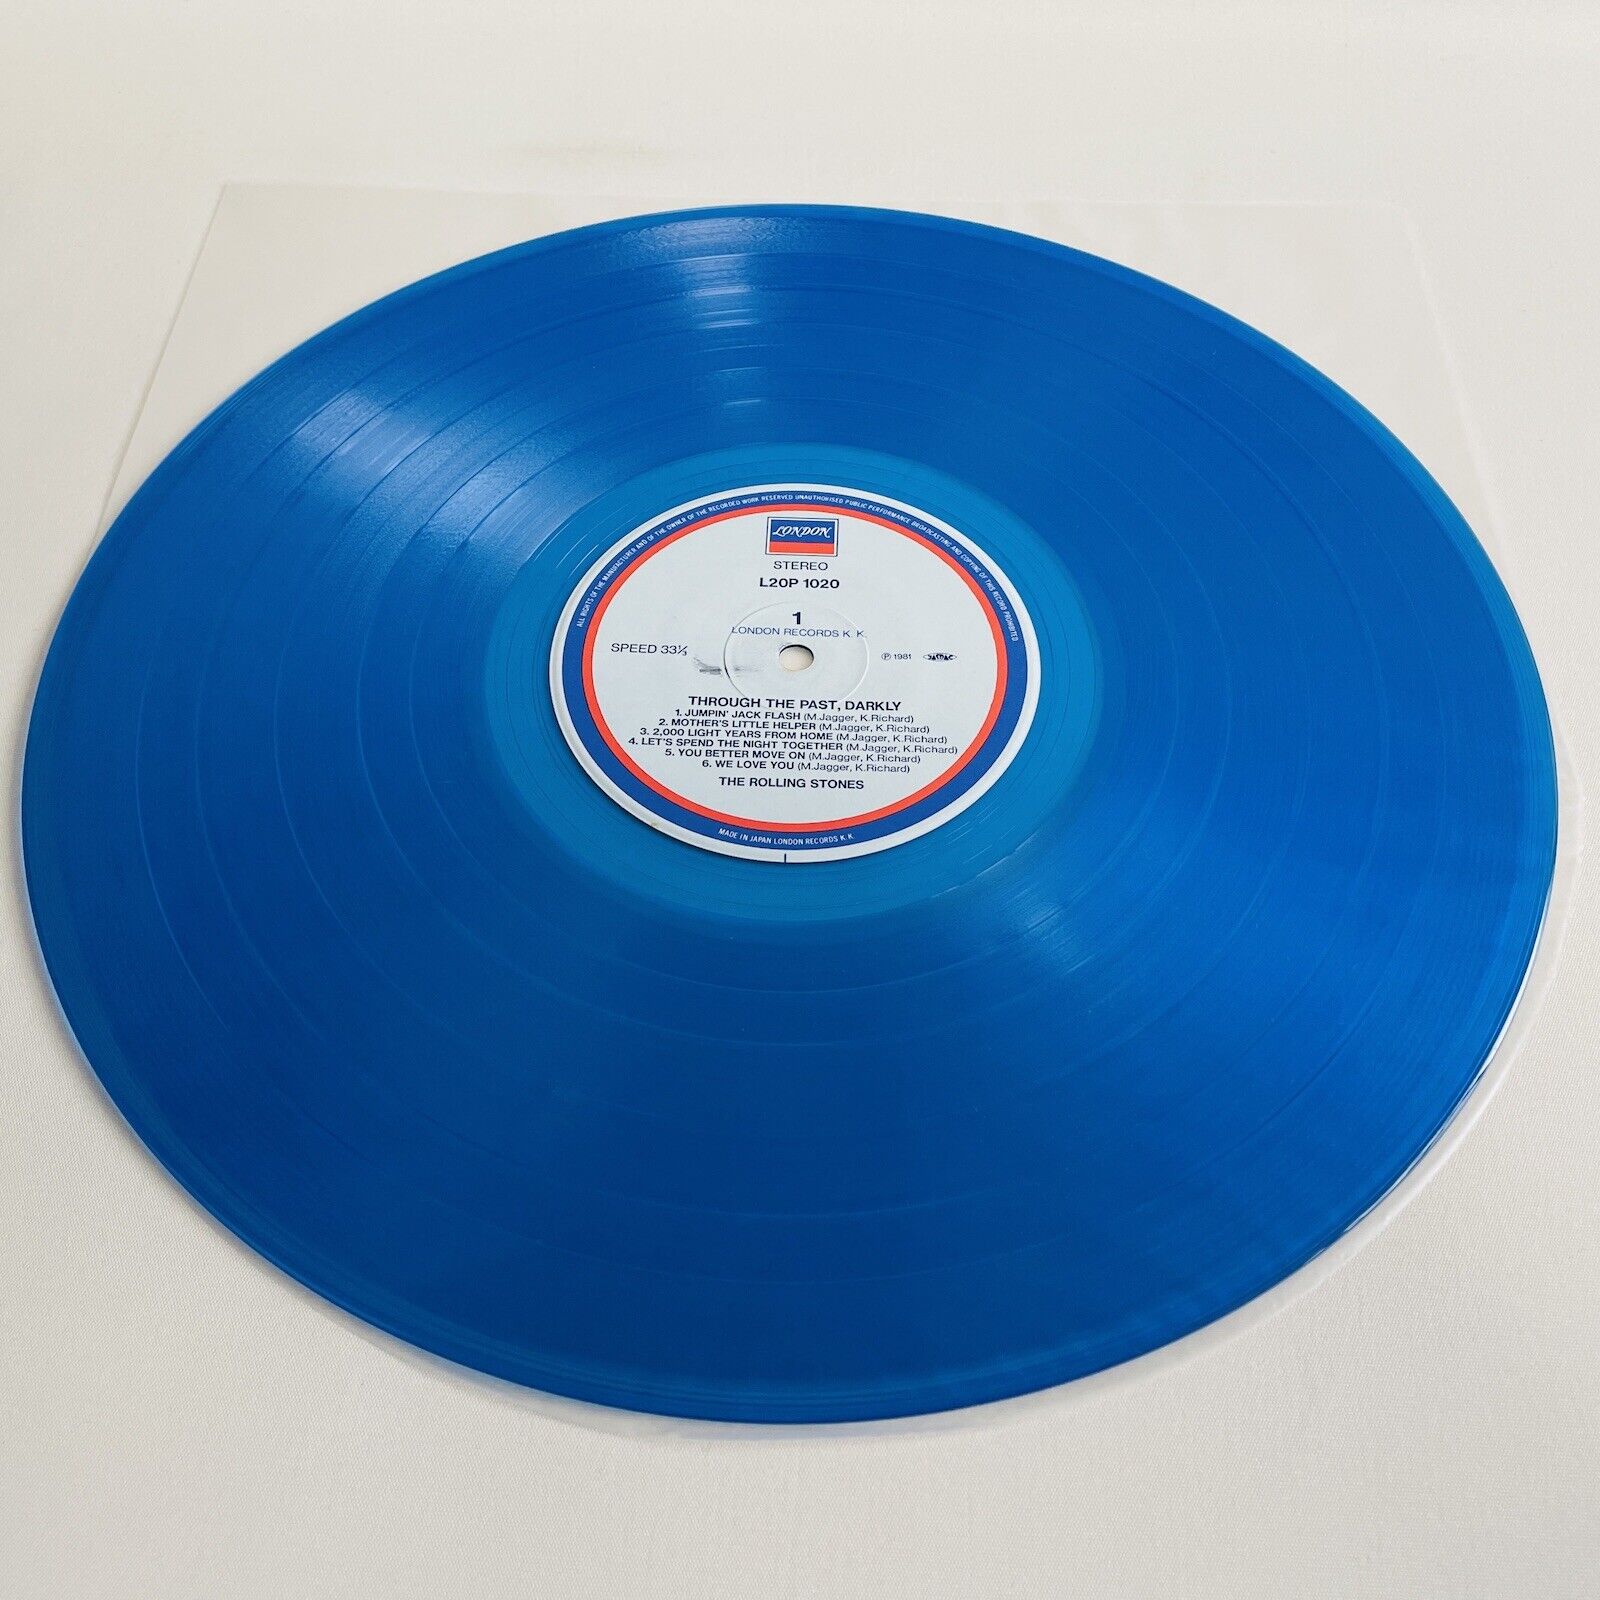 Wax　Past,　The　London　L20P1020　Blue　–　Portal　Records　Rolling　Through　Stones　Darkly